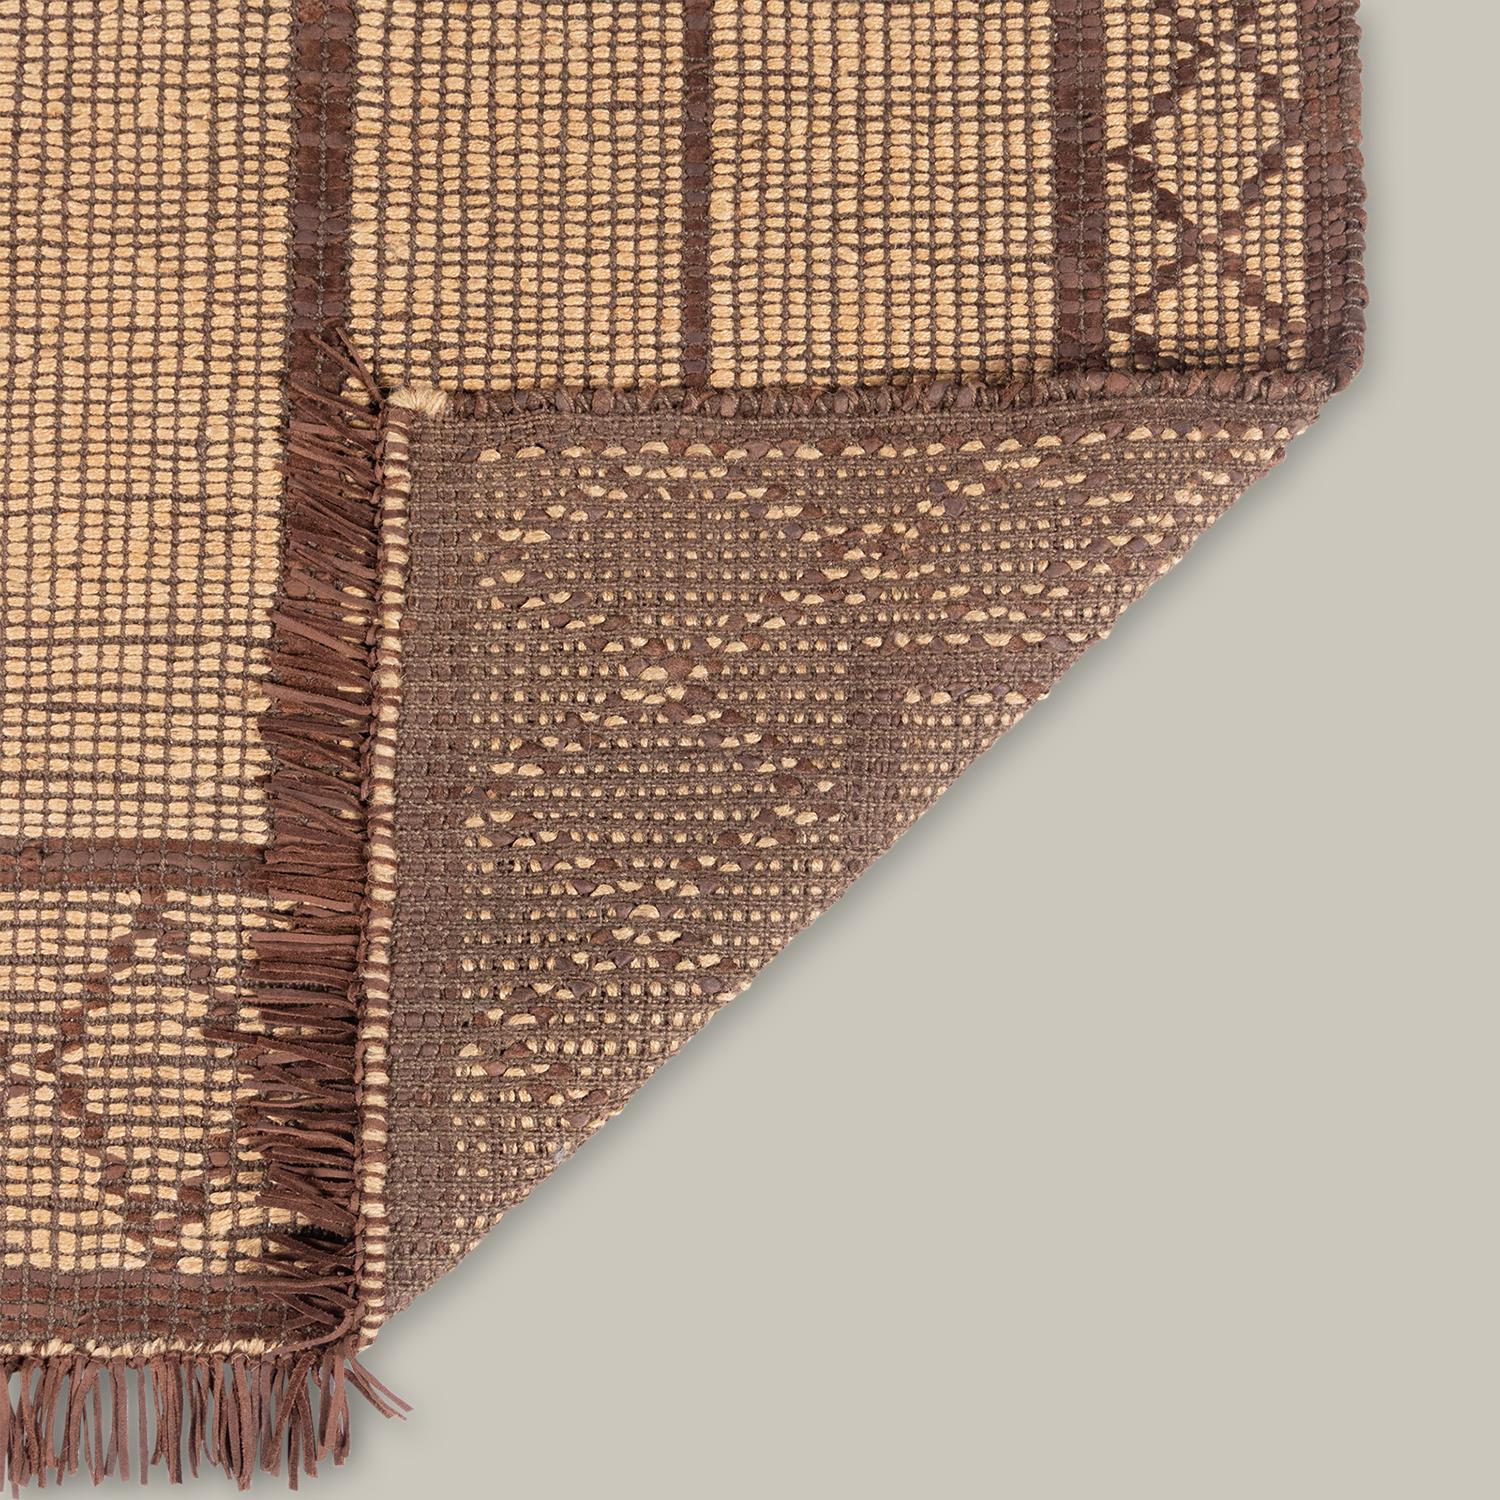 A modern twist on the traditional Tuareg mats, the Tugart Collection celebrates elegance in minimalism. Historically built to withstand wear, the handwoven leather and jute construction ages gracefully. A soft-to-hand texture not often found with